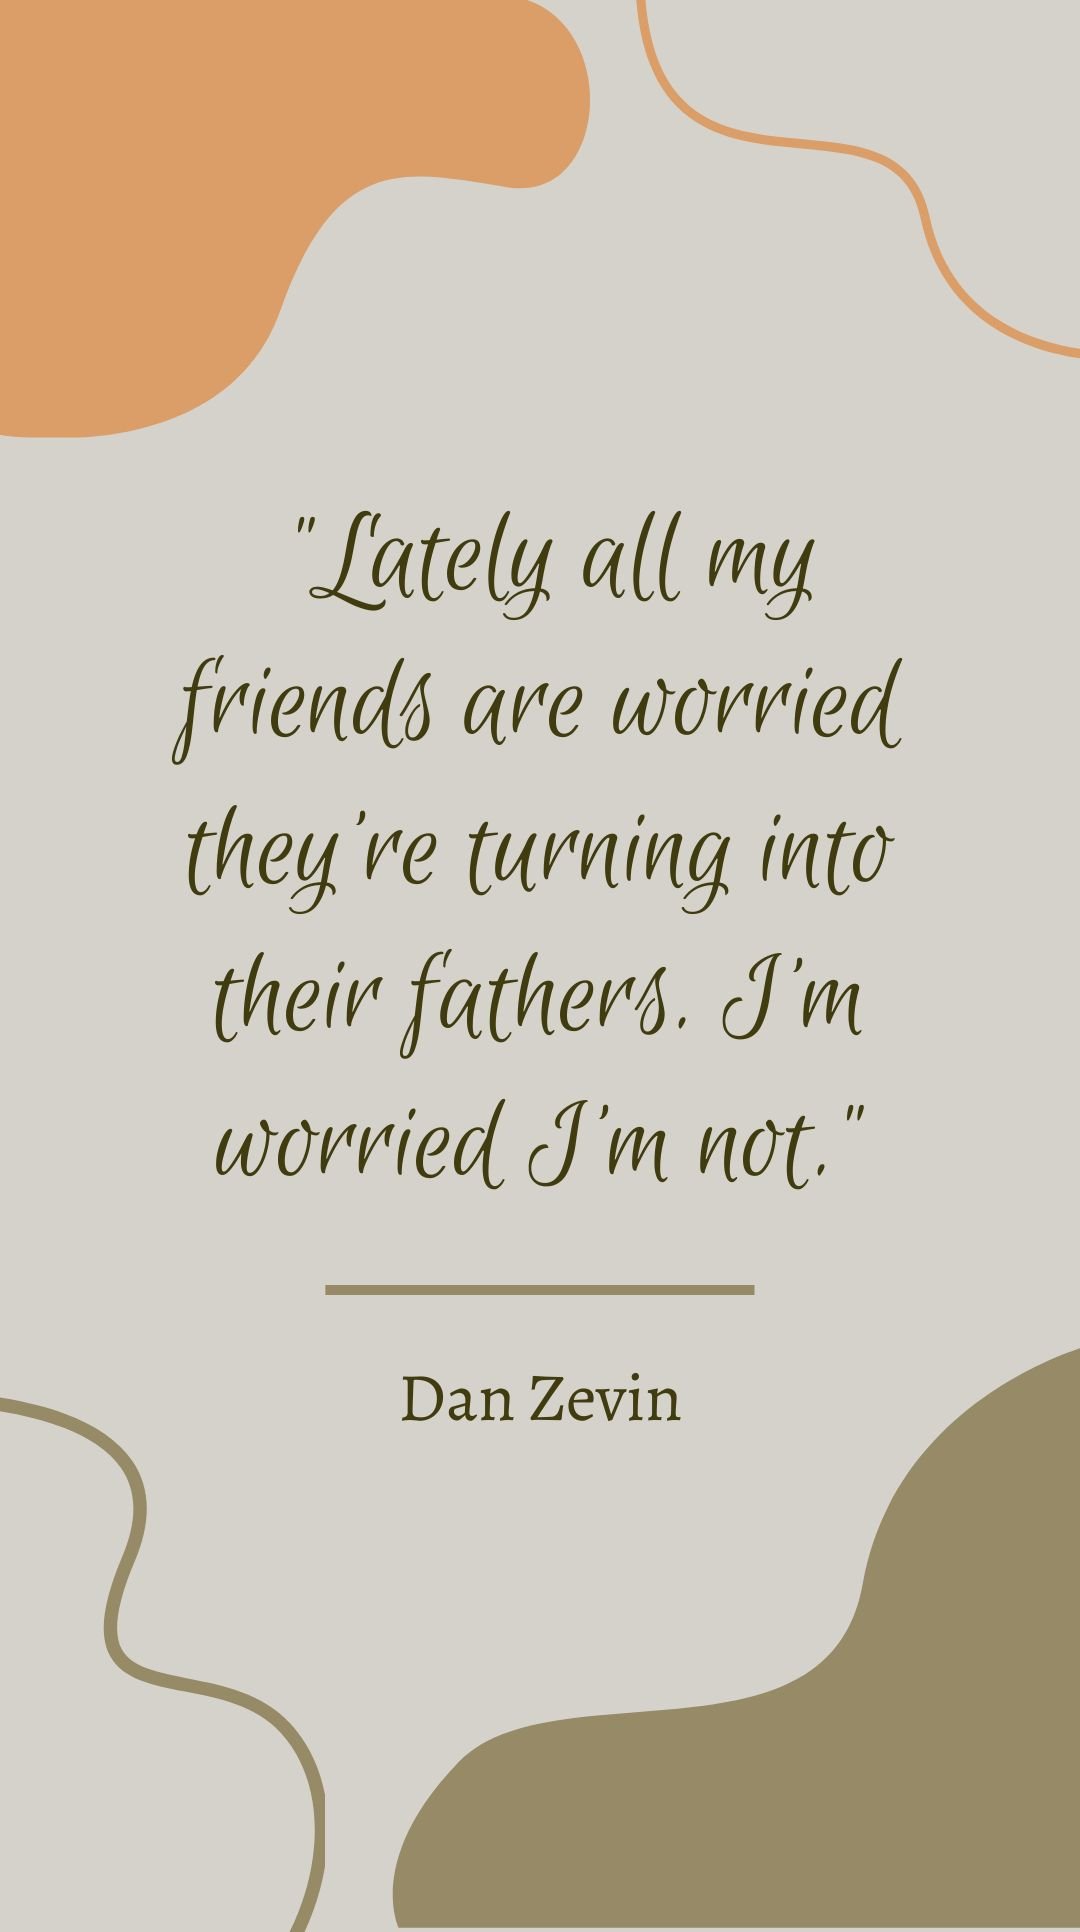 Dan Zevin - Lately all my friends are worried they’re turning into their fathers. I’m worried I’m not. in JPG